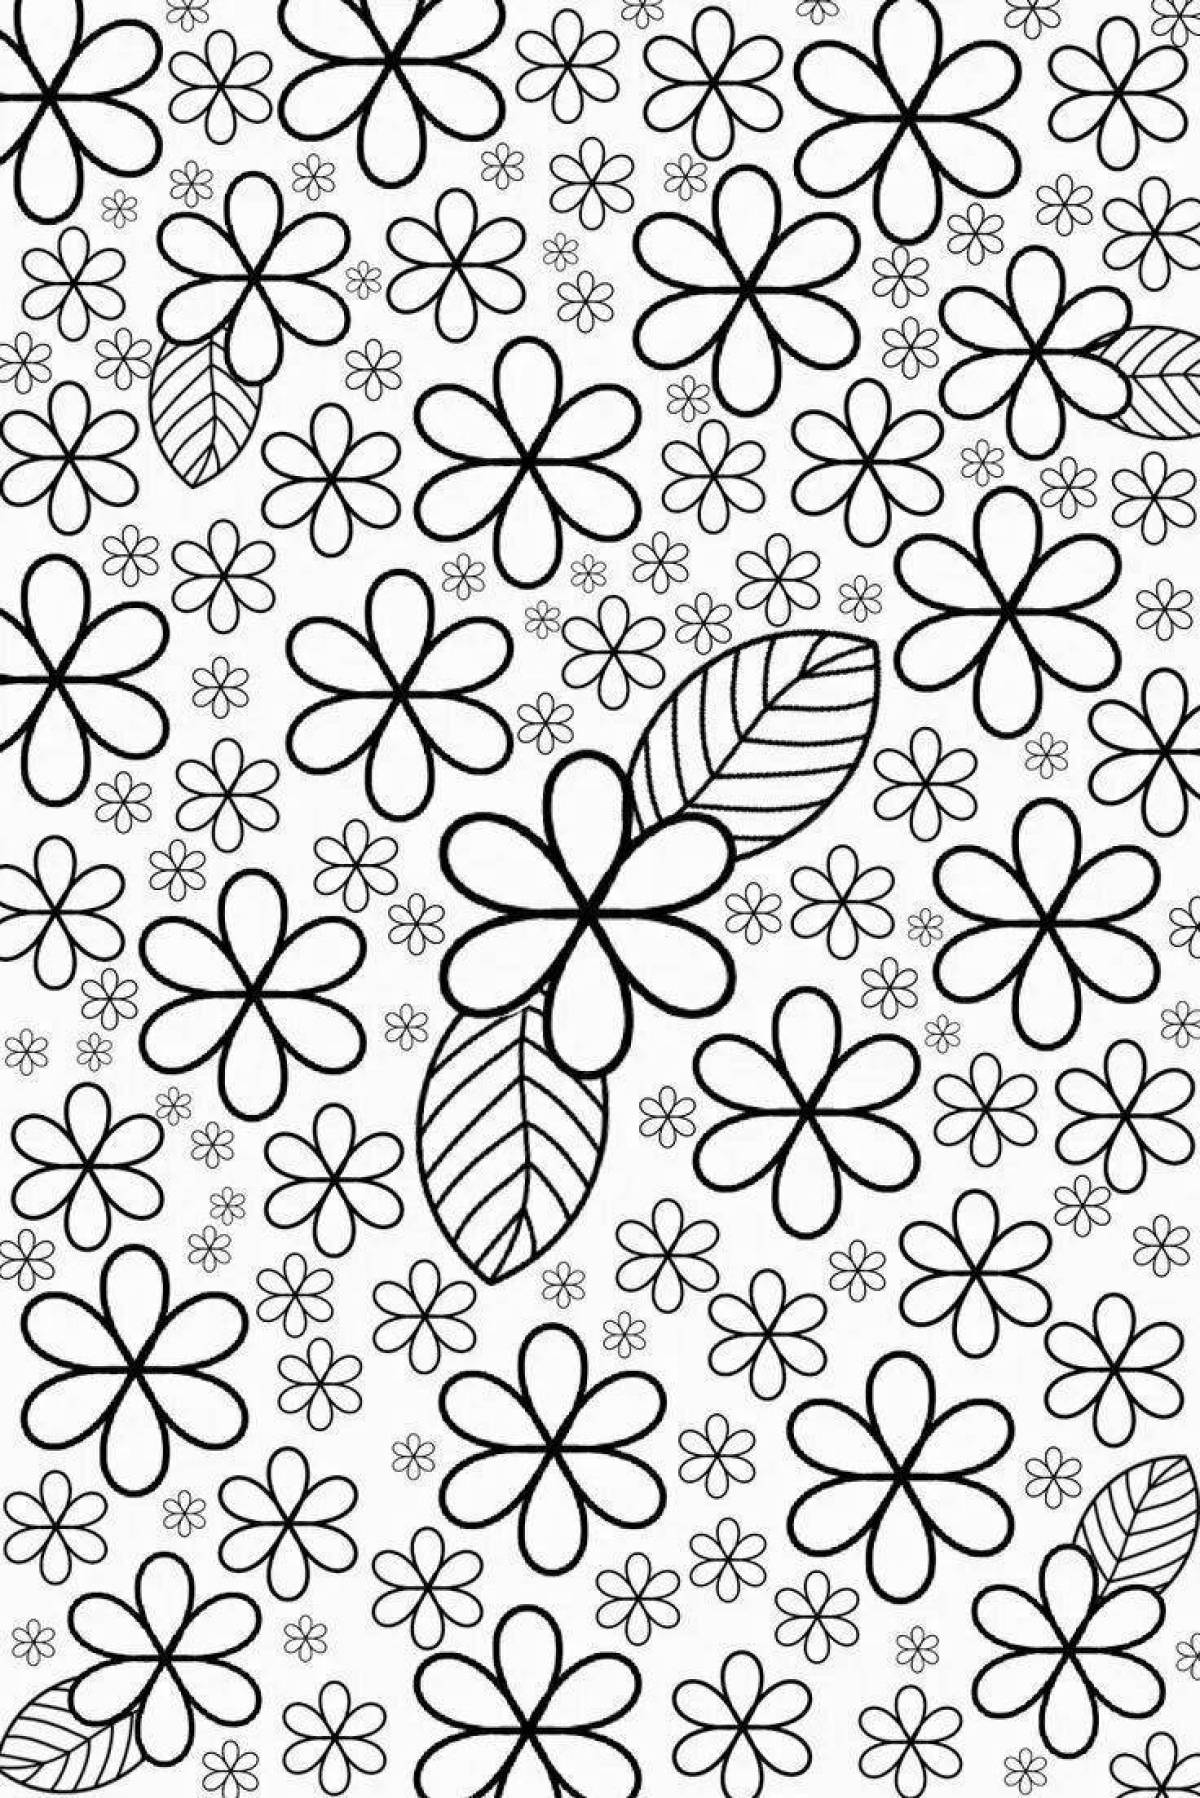 Coloring page background update